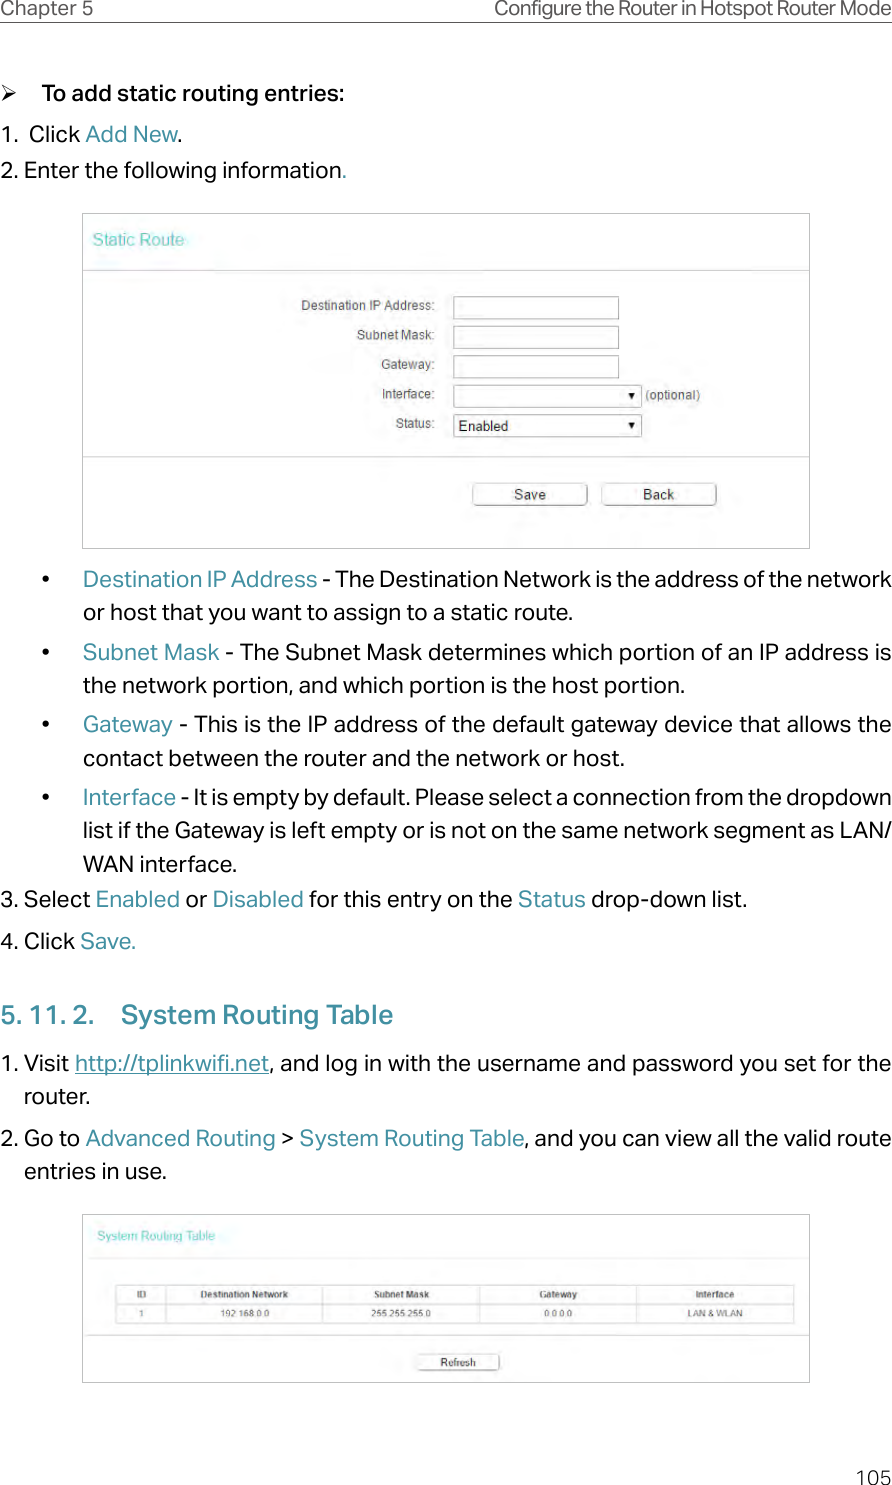 105Chapter 5 Configure the Router in Hotspot Router Mode ¾To add static routing entries:1.  Click Add New.2. Enter the following information.•  Destination IP Address - The Destination Network is the address of the network or host that you want to assign to a static route.•  Subnet Mask - The Subnet Mask determines which portion of an IP address is the network portion, and which portion is the host portion.•  Gateway - This is the IP address of the default gateway device that allows the contact between the router and the network or host.•  Interface - It is empty by default. Please select a connection from the dropdown list if the Gateway is left empty or is not on the same network segment as LAN/WAN interface.3. Select Enabled or Disabled for this entry on the Status drop-down list.4. Click Save.5. 11. 2.  System Routing Table1. Visit http://tplinkwifi.net, and log in with the username and password you set for the router.2. Go to Advanced Routing &gt; System Routing Table, and you can view all the valid route entries in use. 